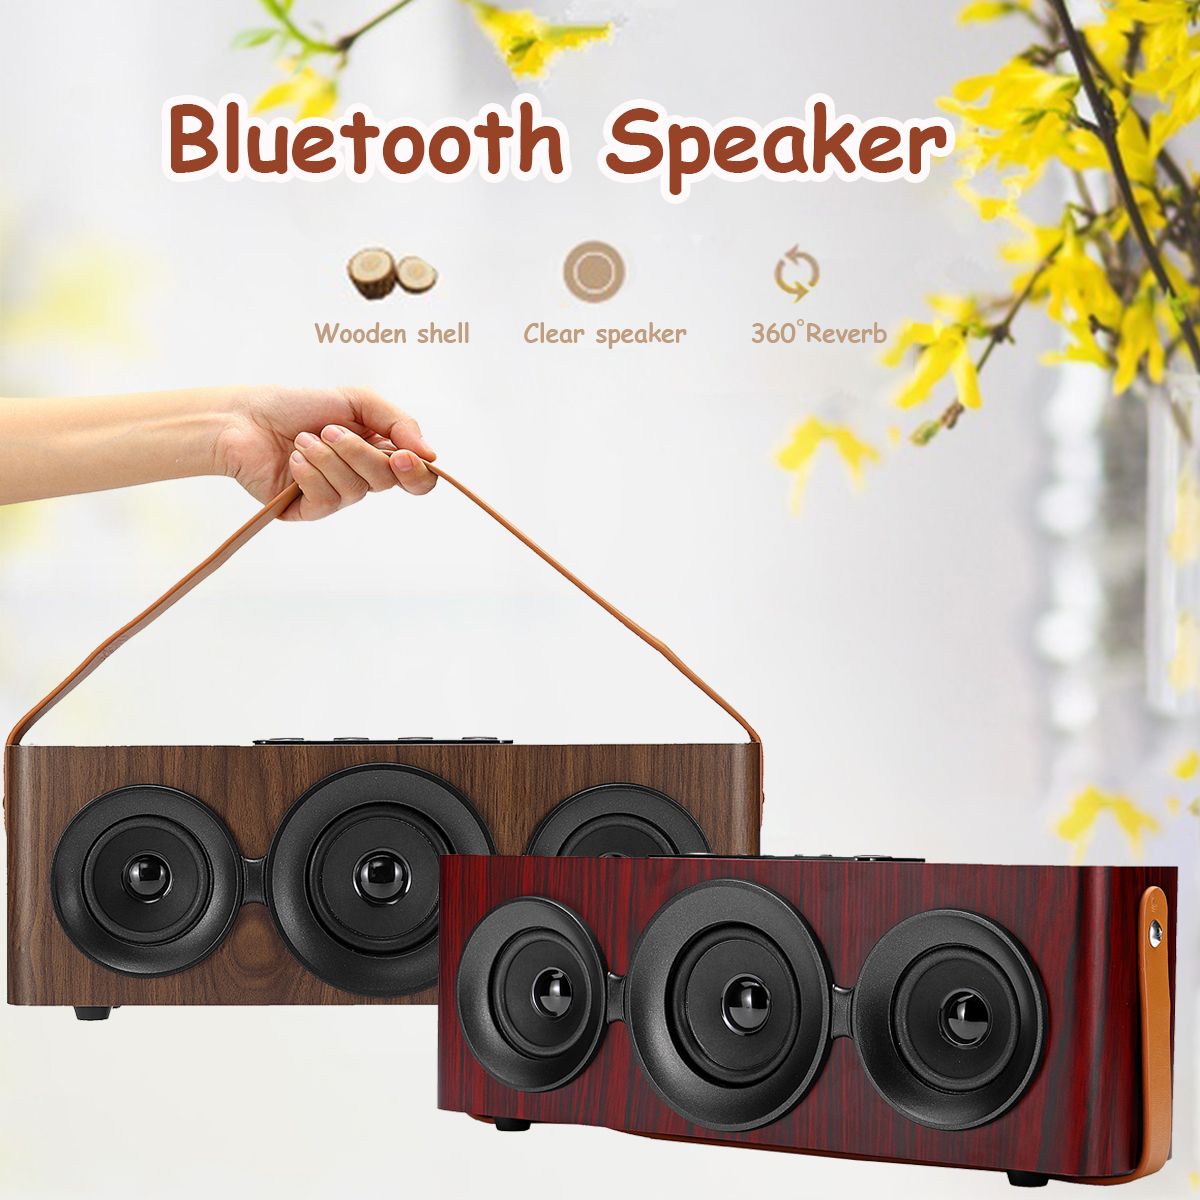 Wooden-Wireless-bluetooth-Speaker-Stereo-Subwoofer-Sound-FM-Radio-TF-Card-Handsfree-With-Mic-1375799